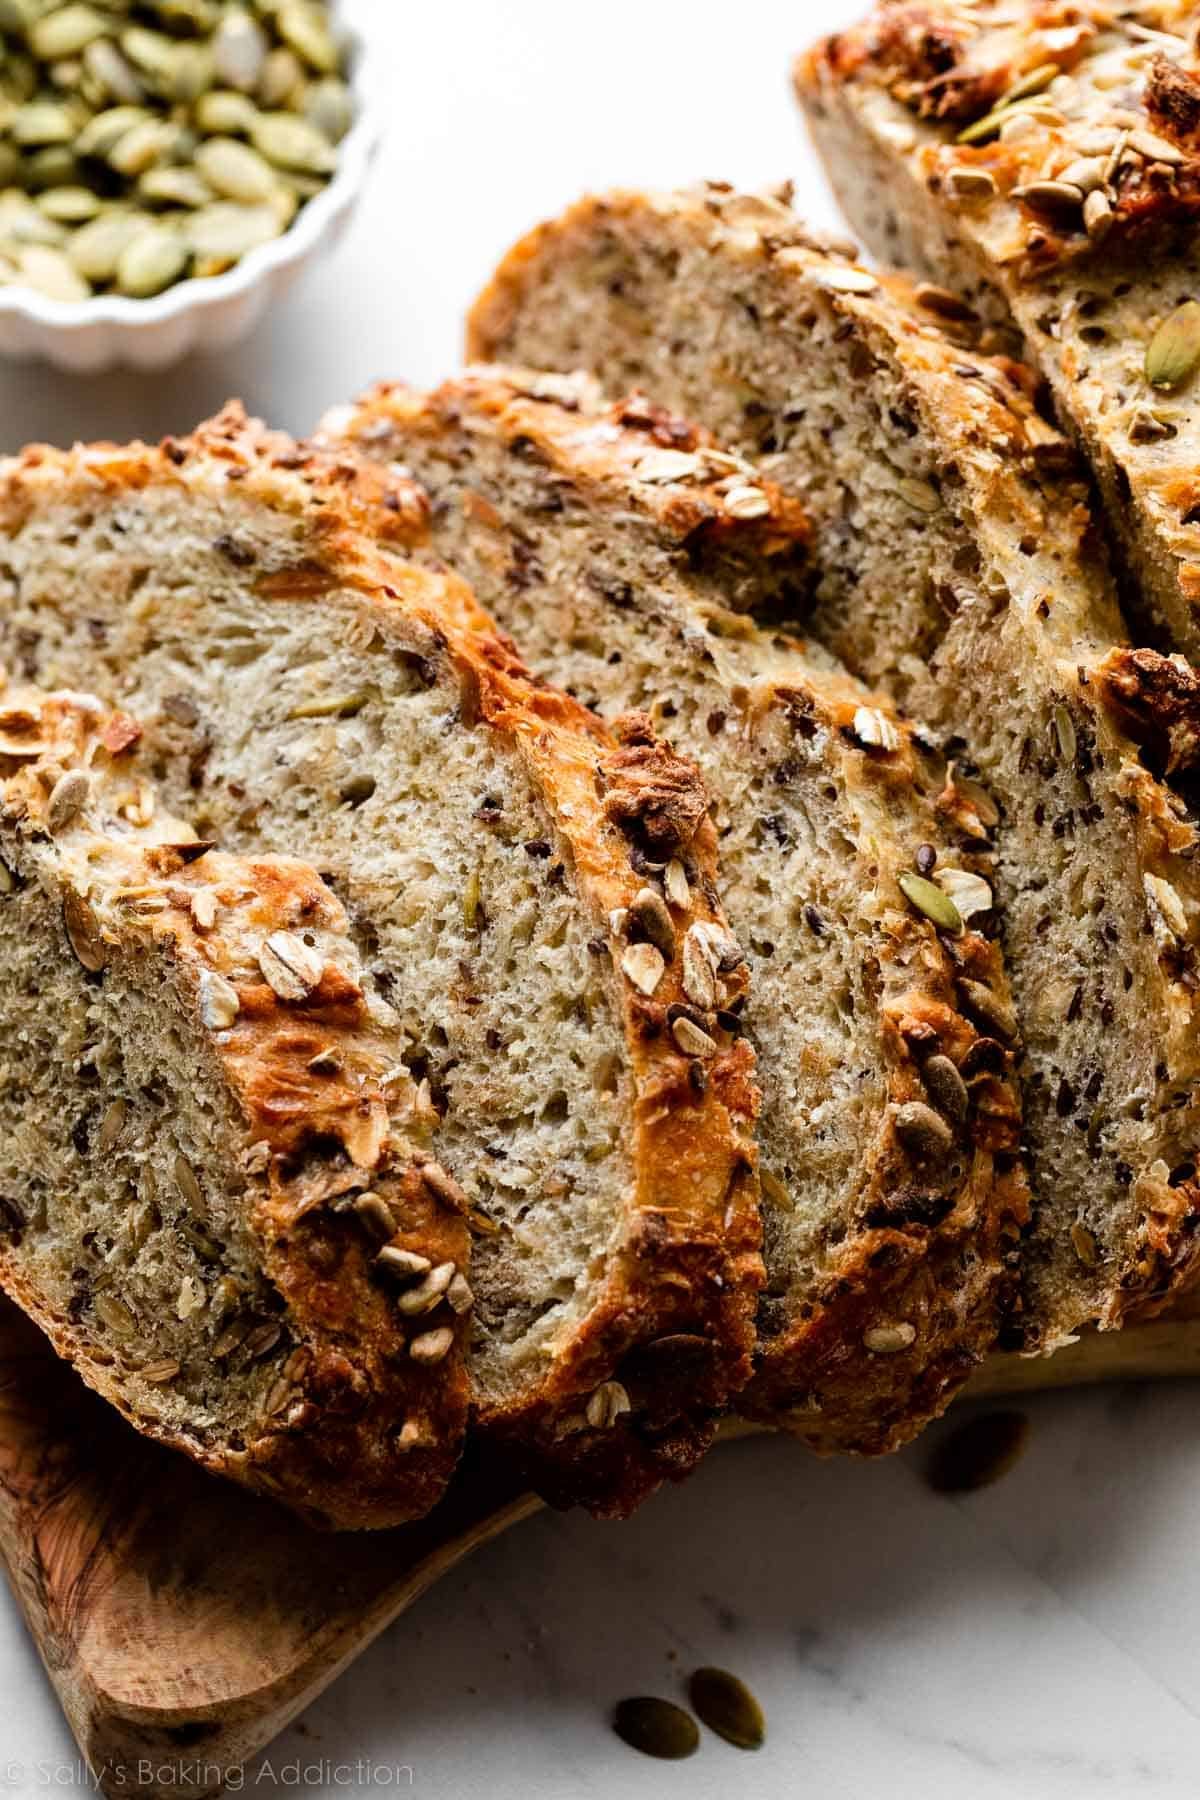 4 slices of seeded oat bread.